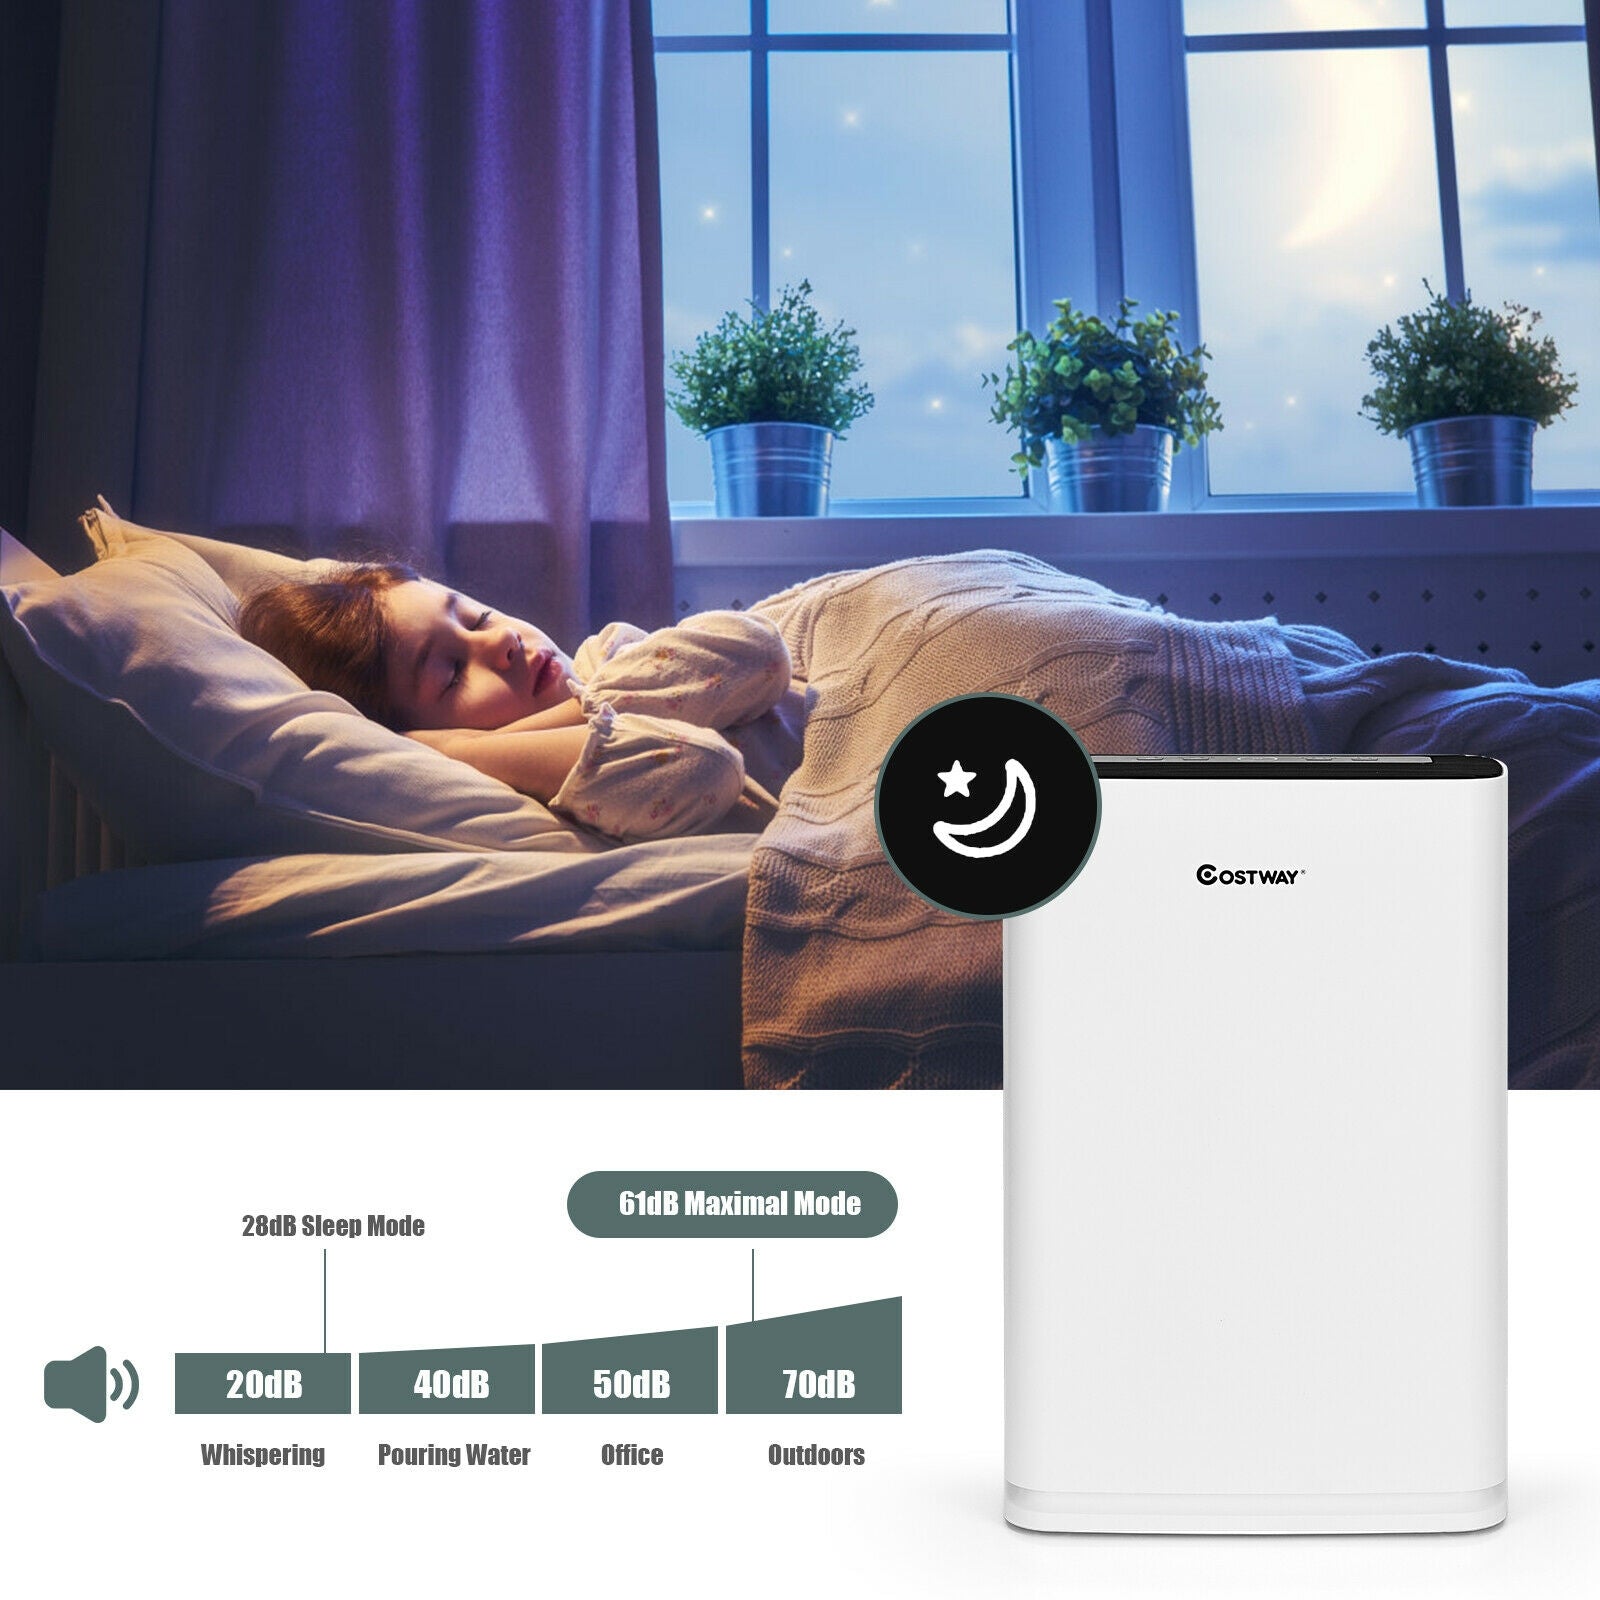 Auto and Sleeping Modes: The intelligent sensor automatically adjusts the fan speed based on real-time air quality. The sleeping mode is specifically designed for bedrooms, ensuring low noise levels and creating a quiet and comfortable indoor environment to aid in falling asleep.